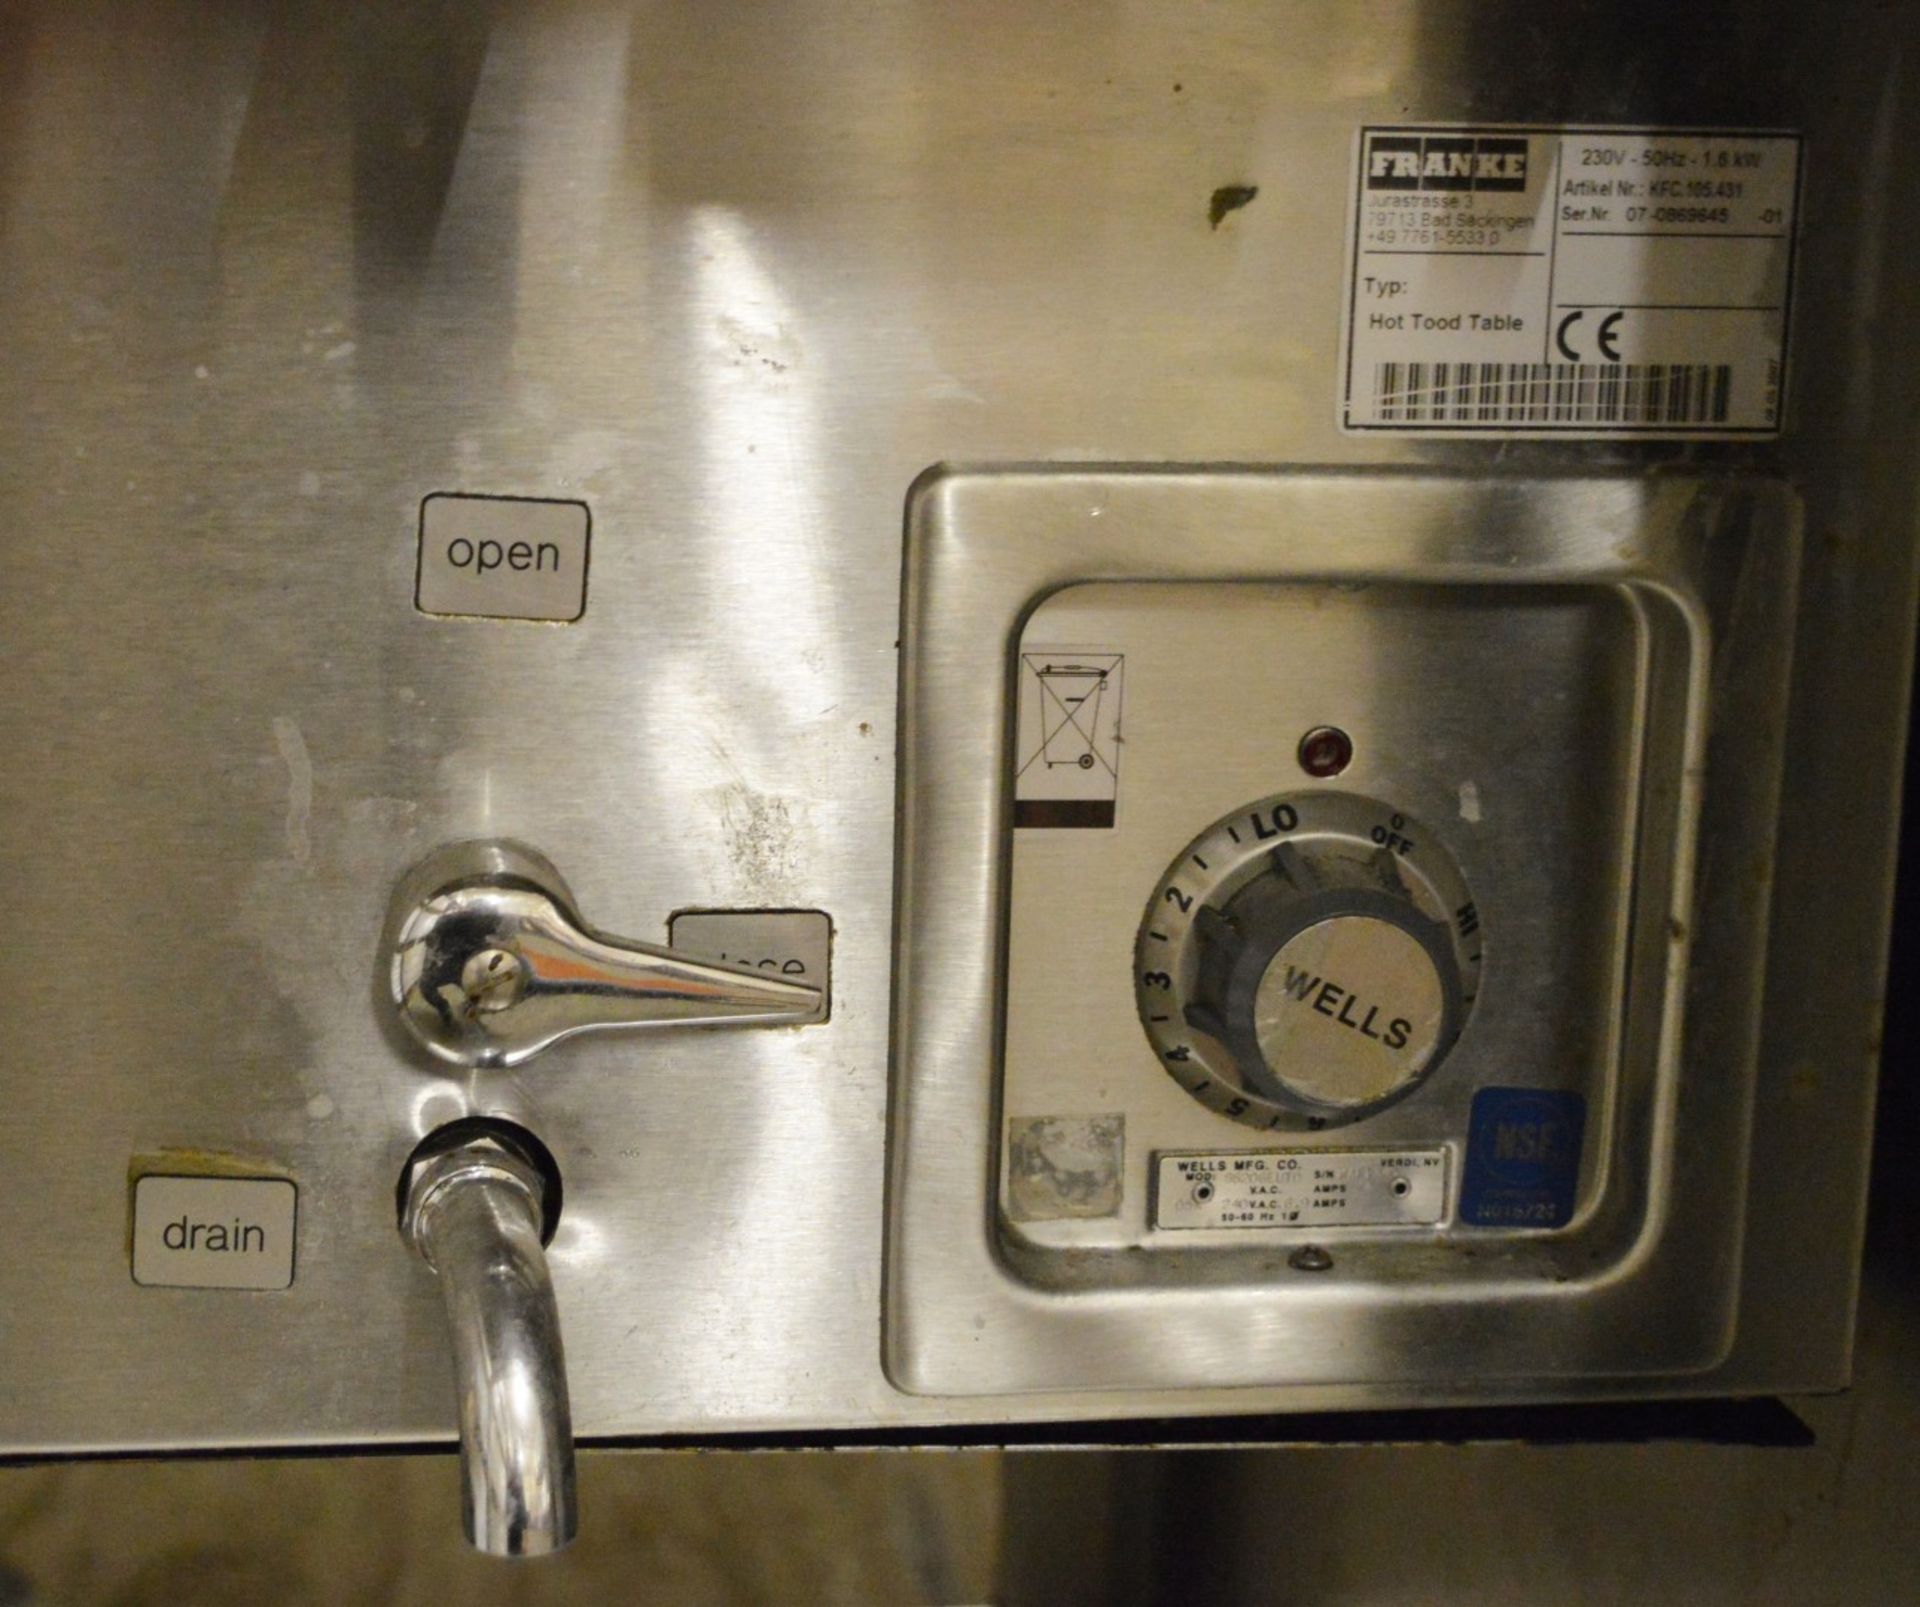 1 x Franke Stainless Steel Prep Table With Single Door Chiller, Fan Cooled Saladette, Wells SS206 - Image 5 of 12